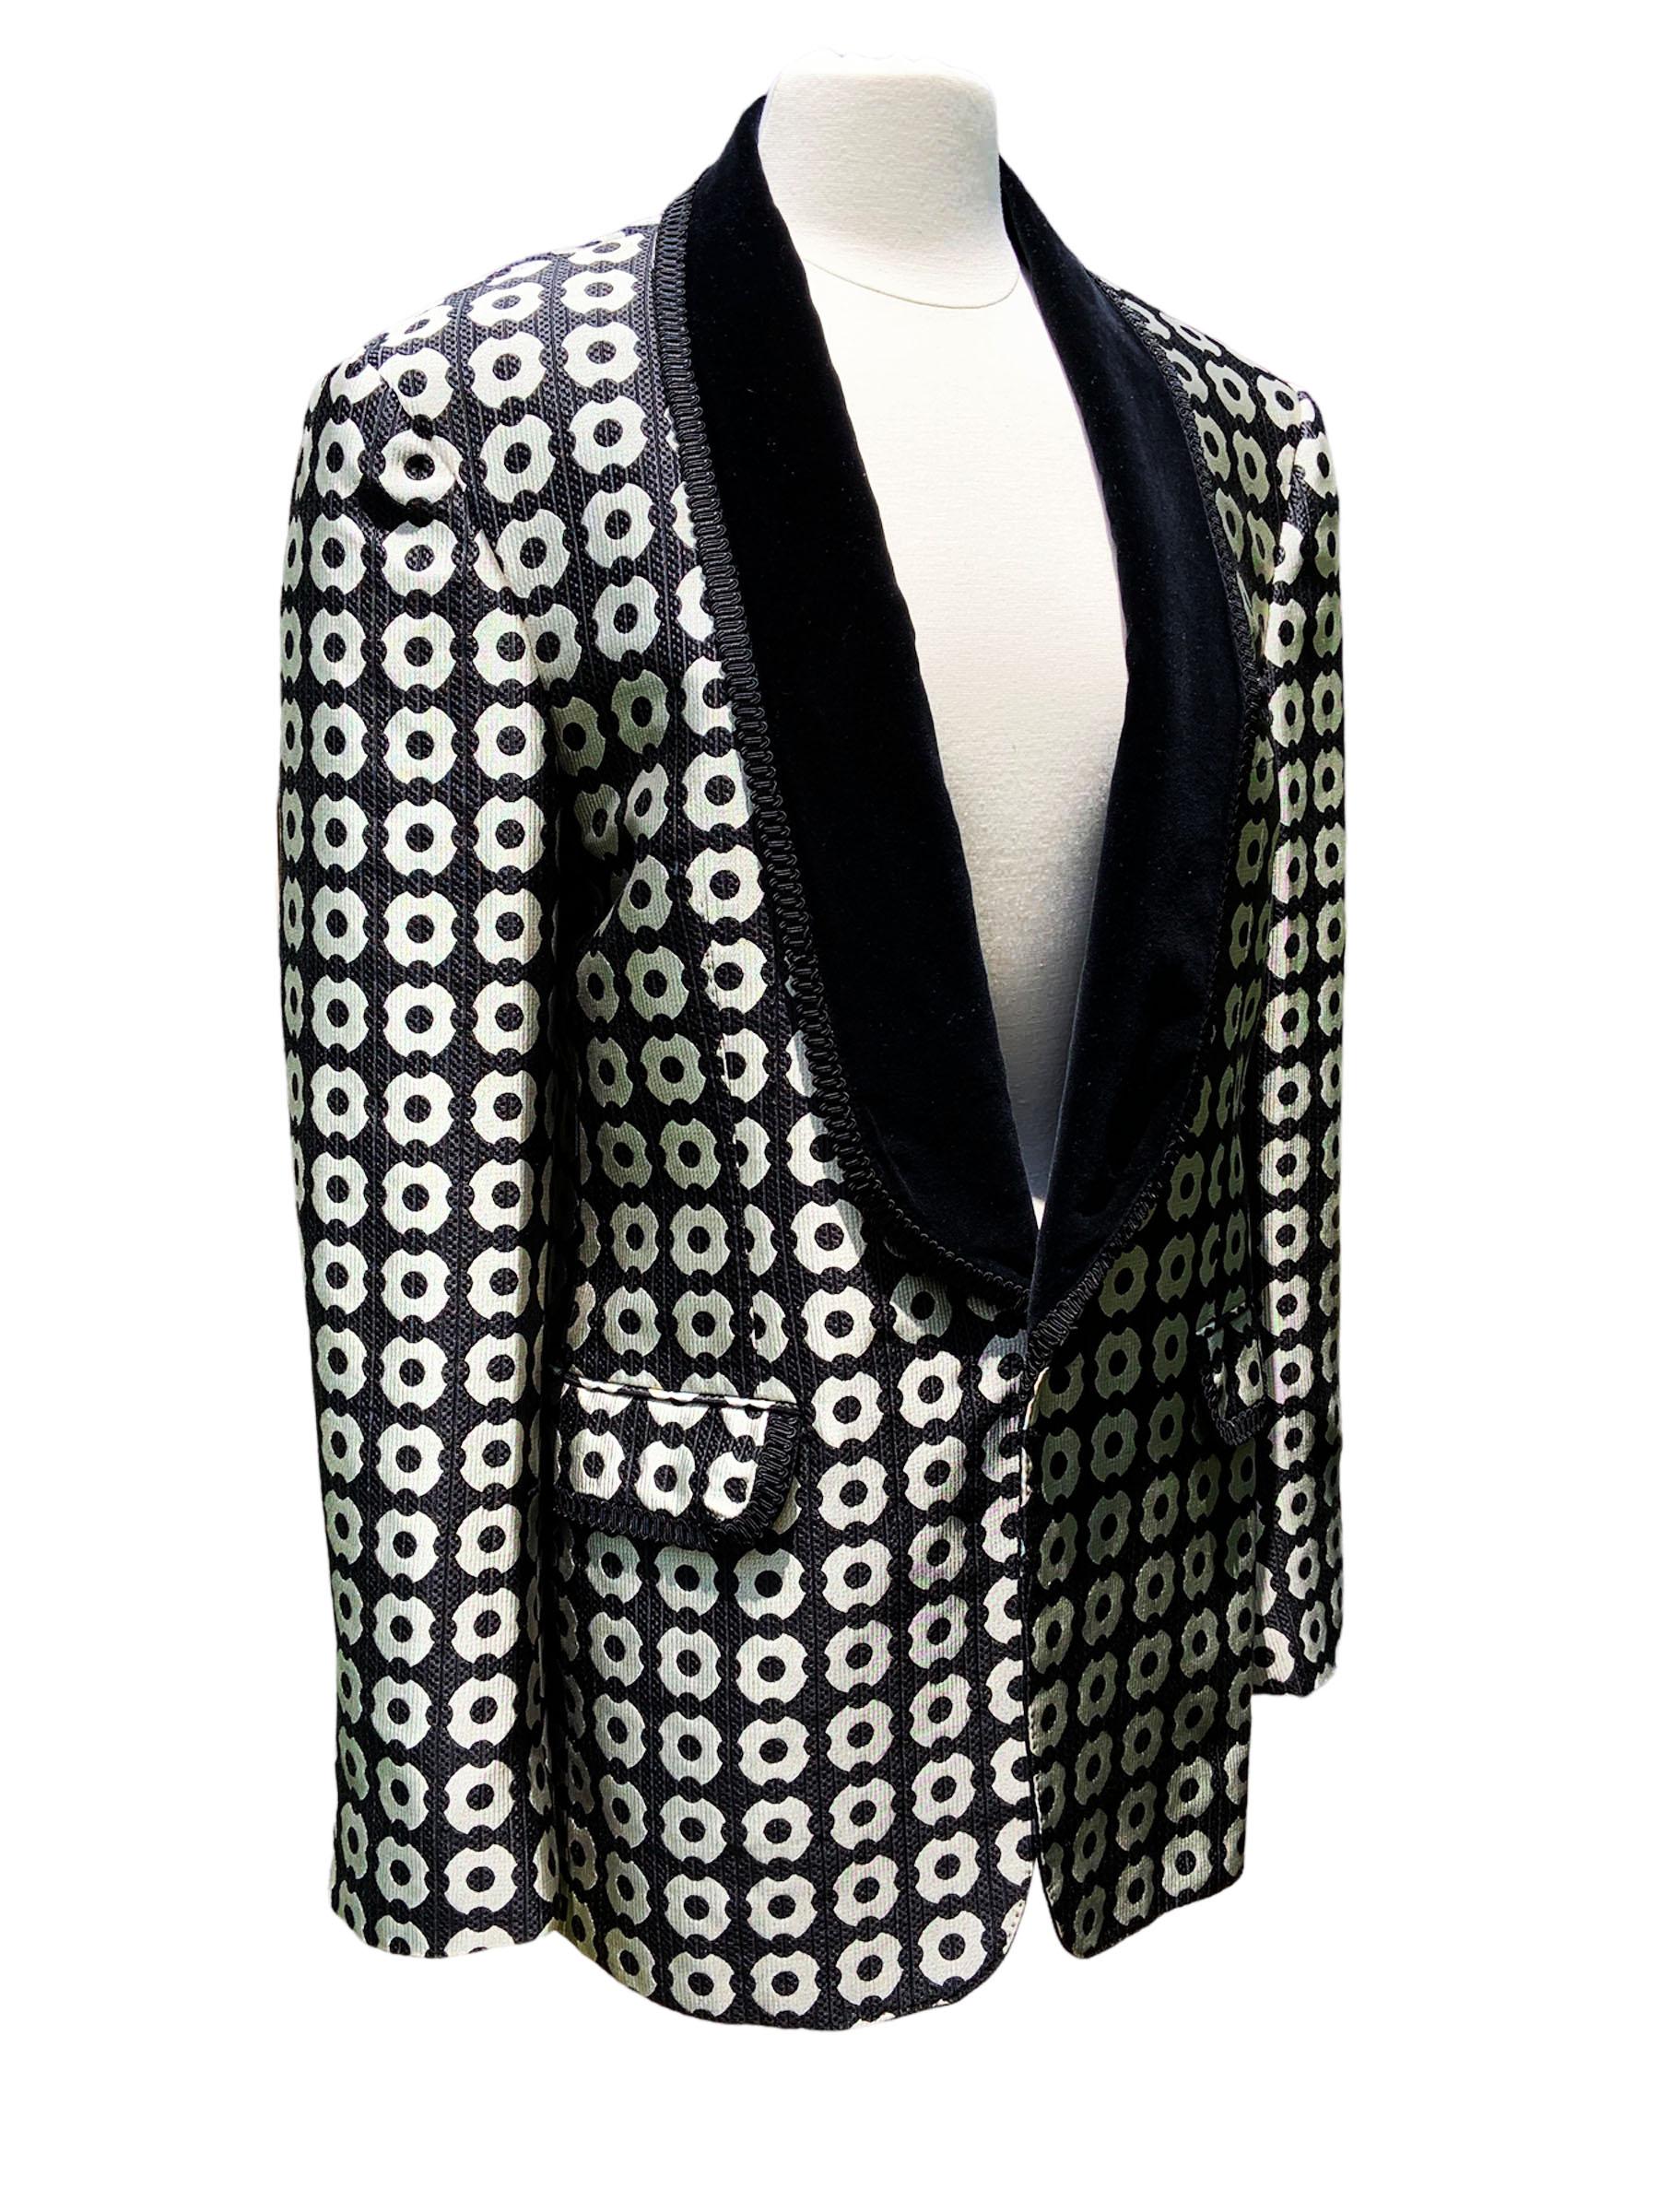 Tom Ford for Gucci F/W 2004 Runway Men's Tuxedo Cocktail Jacket It. 50 R 2